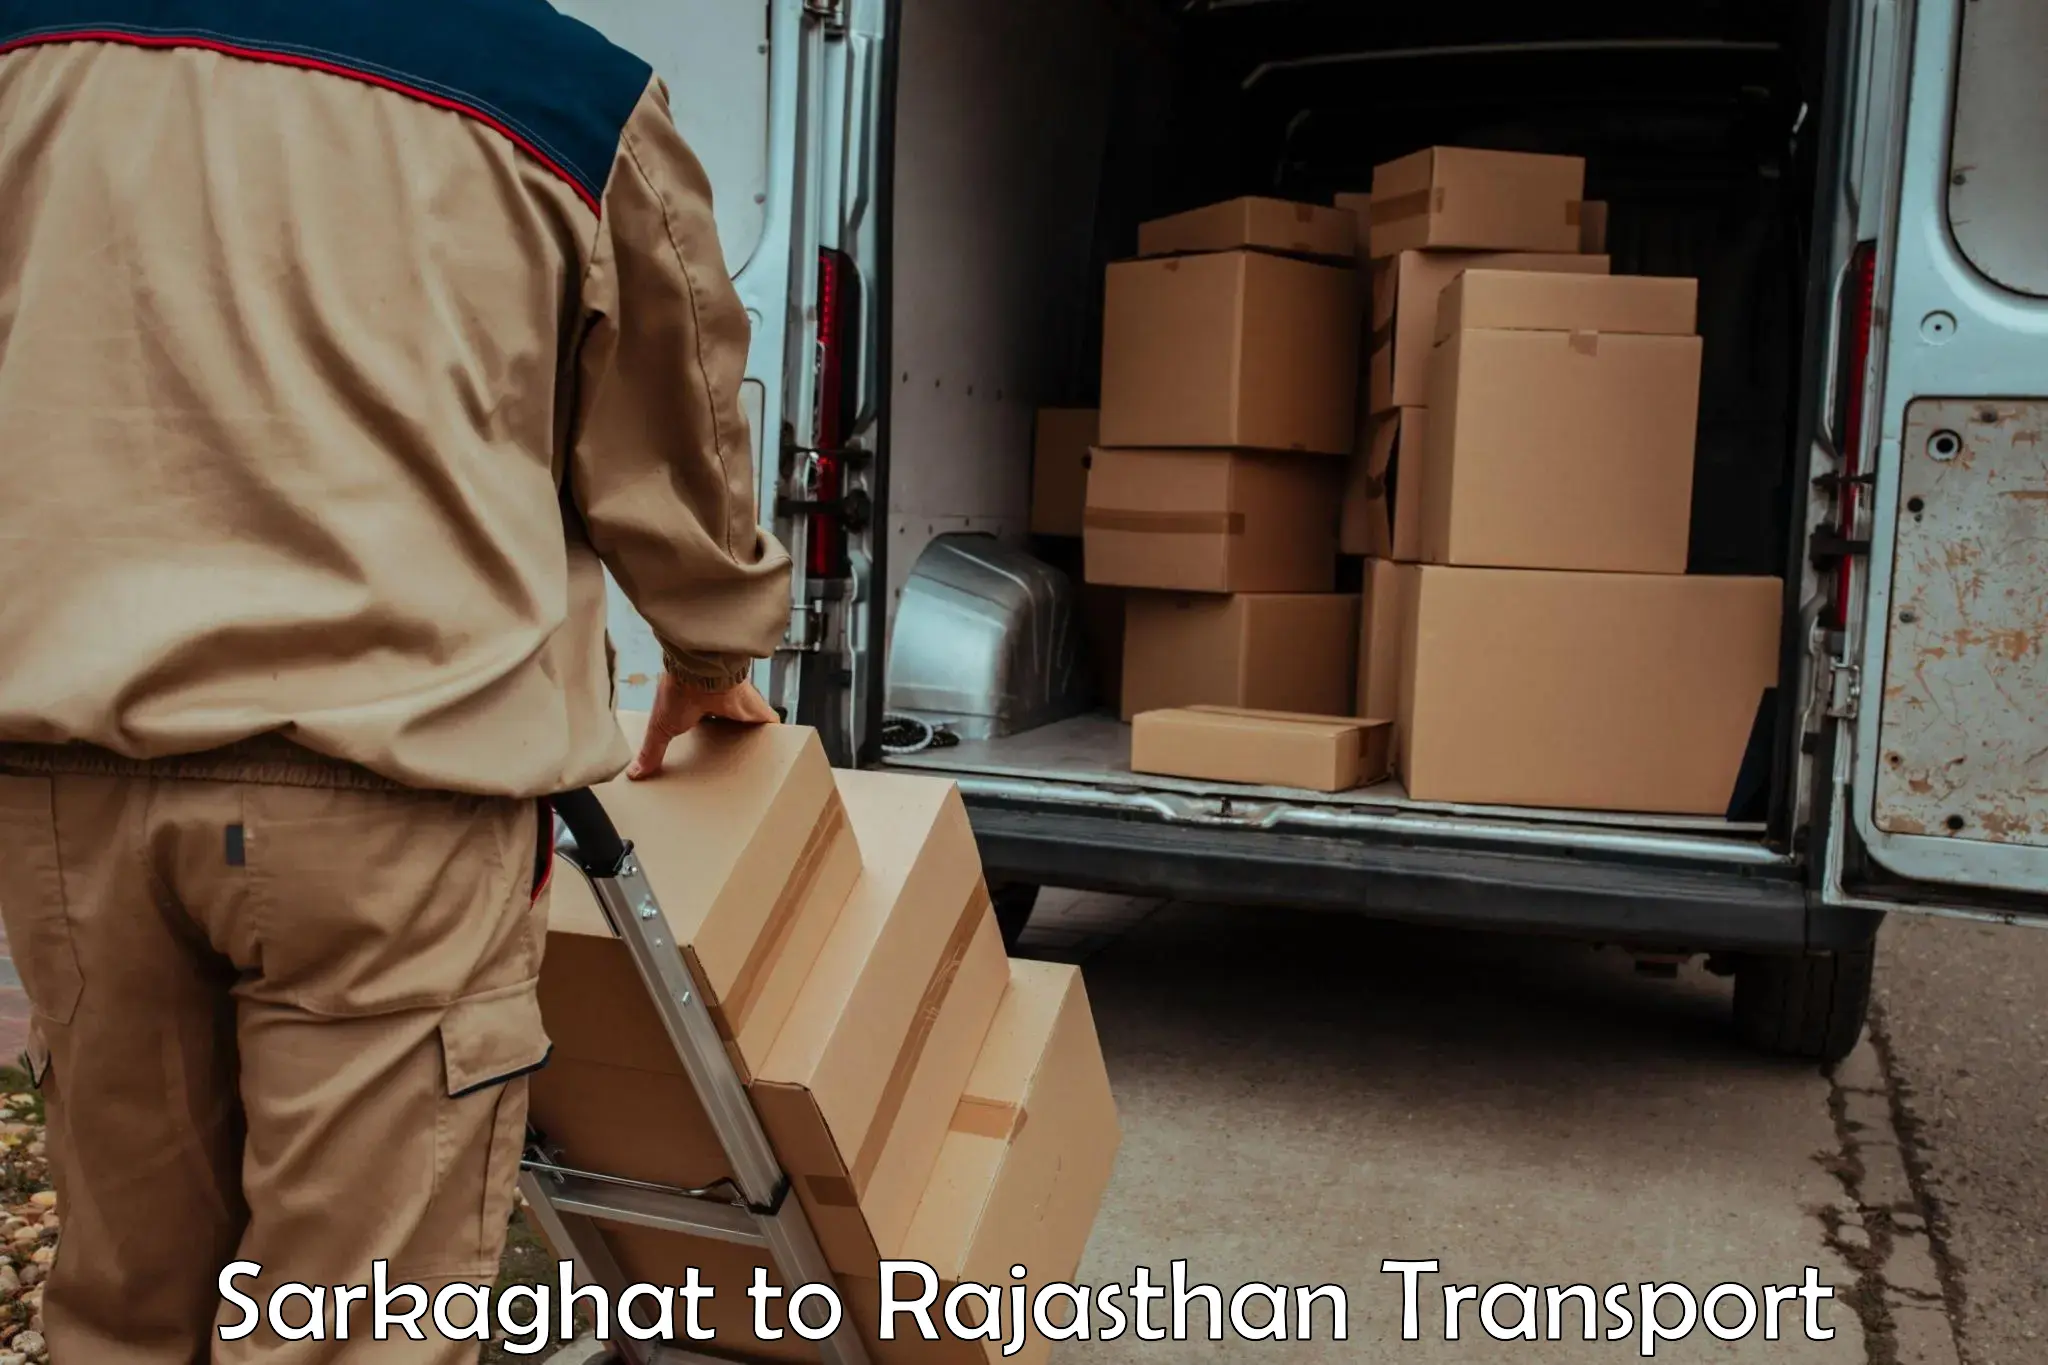 Air freight transport services Sarkaghat to Fatehnagar